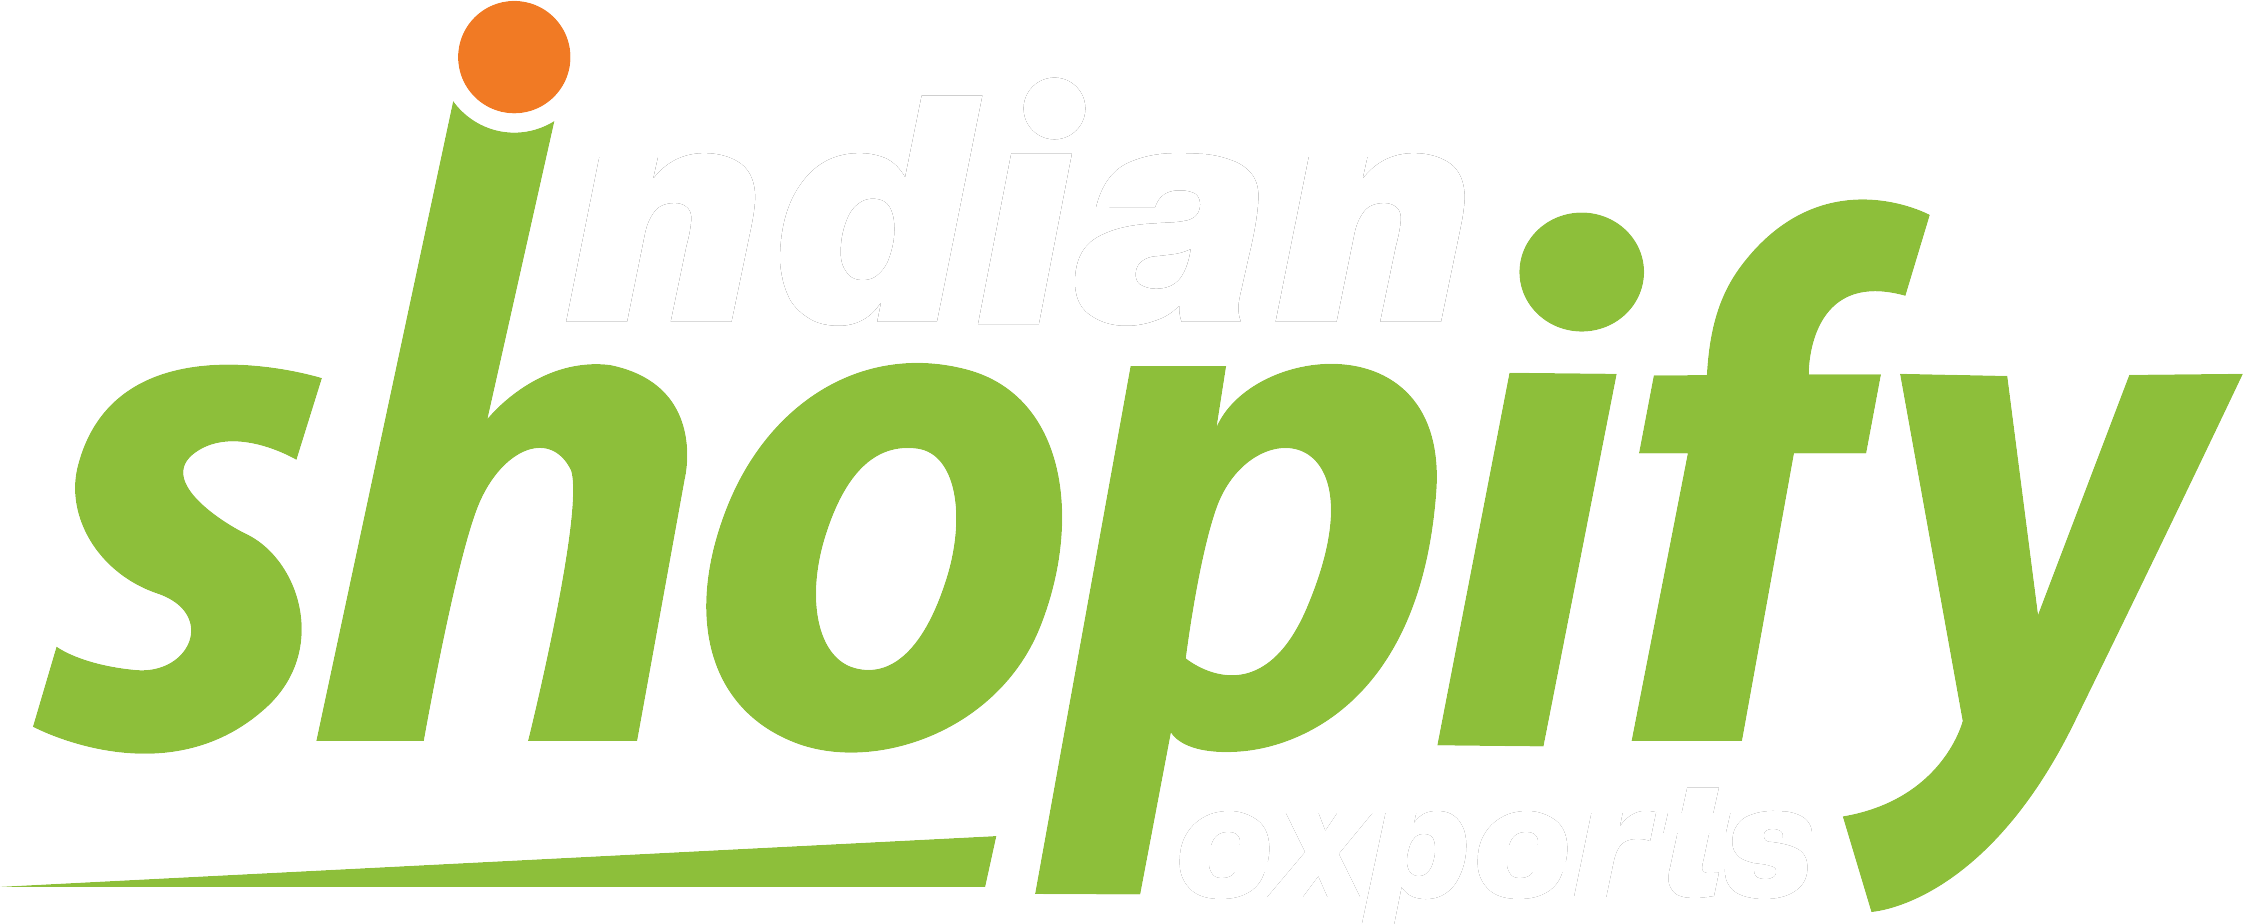 Indian Shopify Experts